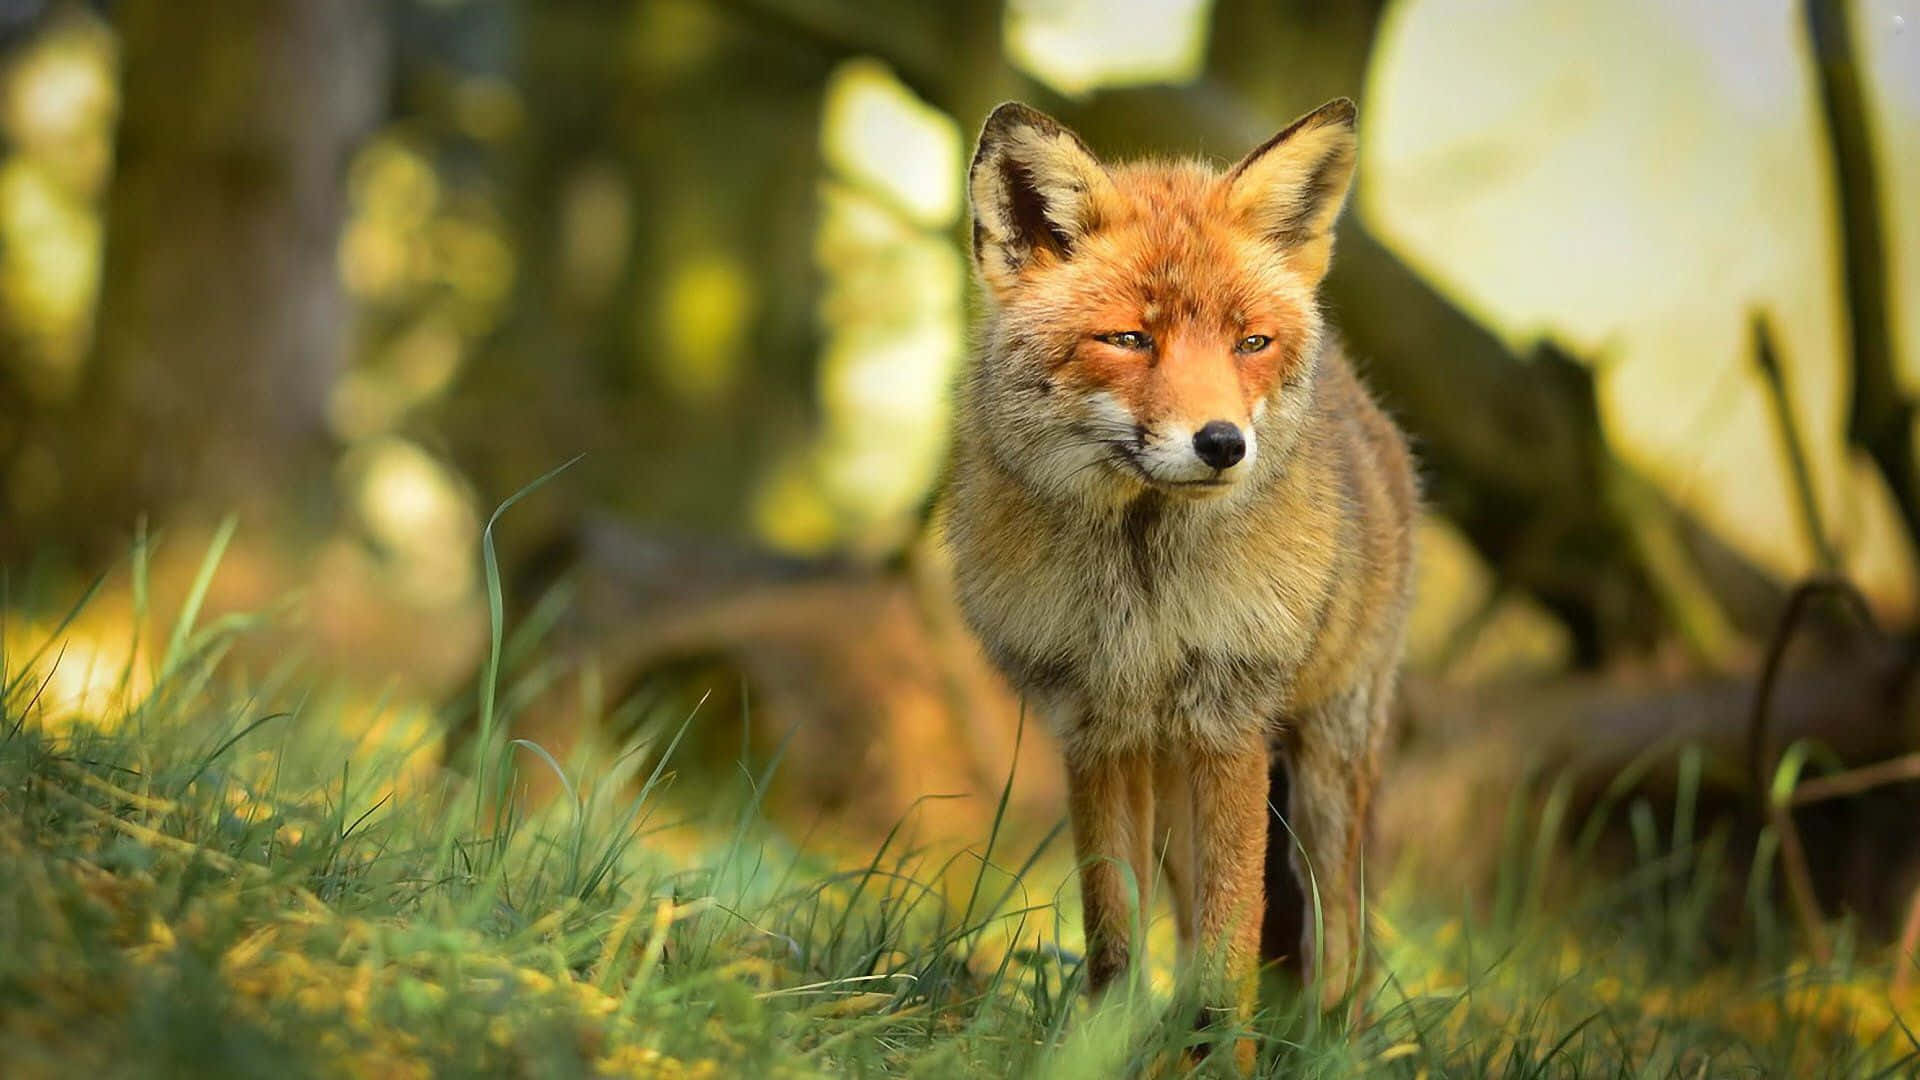 A Fox Is Standing In The Grass In The Forest